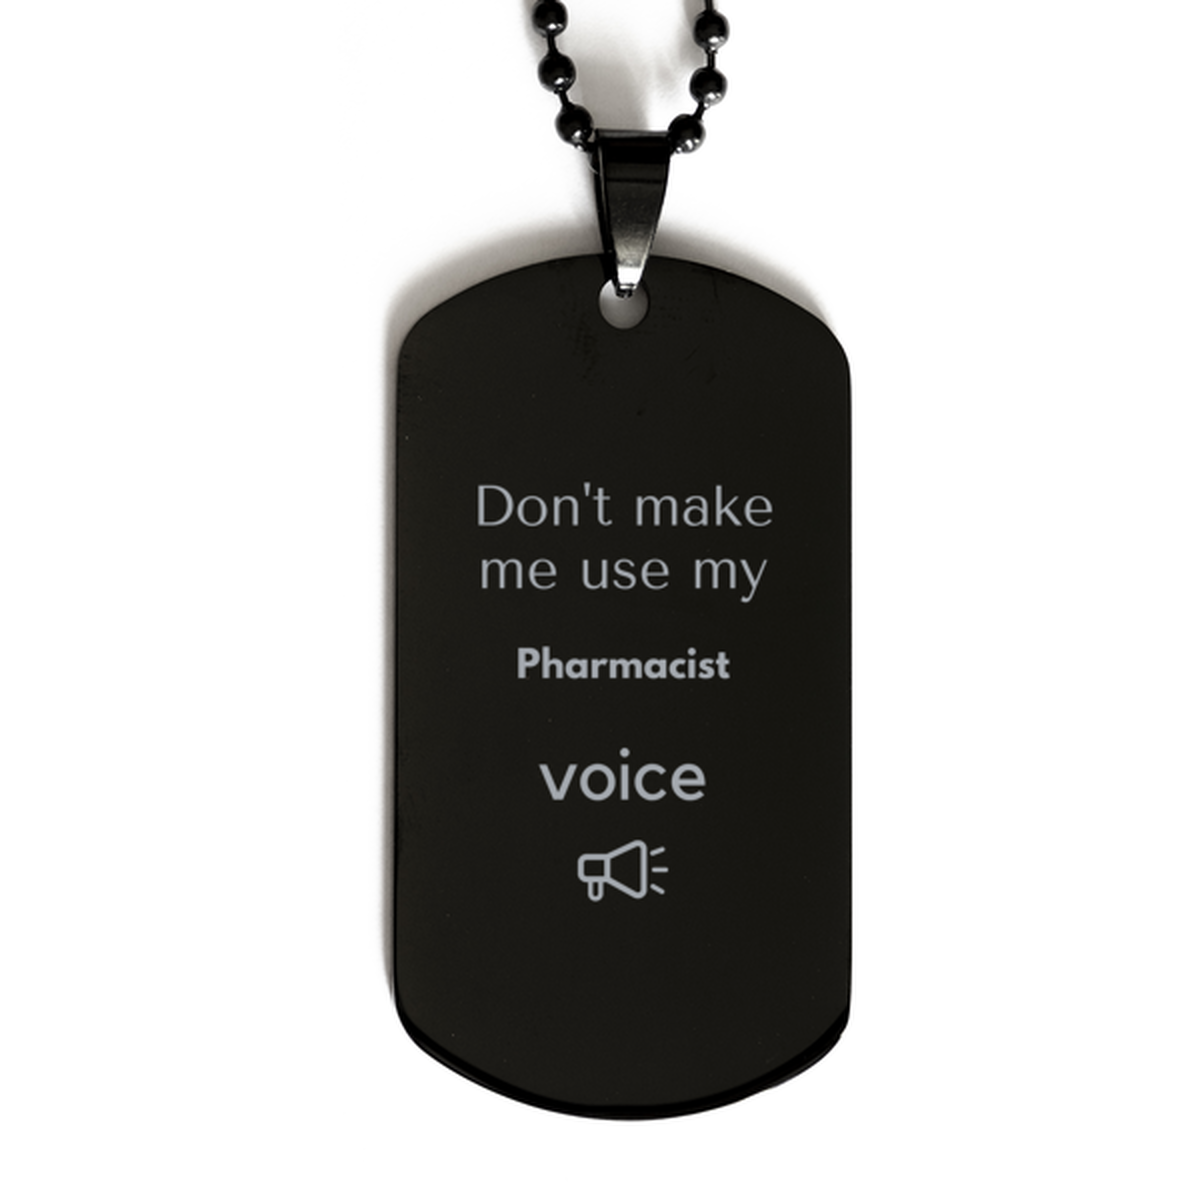 Don't make me use my Pharmacist voice, Sarcasm Pharmacist Gifts, Christmas Pharmacist Black Dog Tag Birthday Unique Gifts For Pharmacist Coworkers, Men, Women, Colleague, Friends